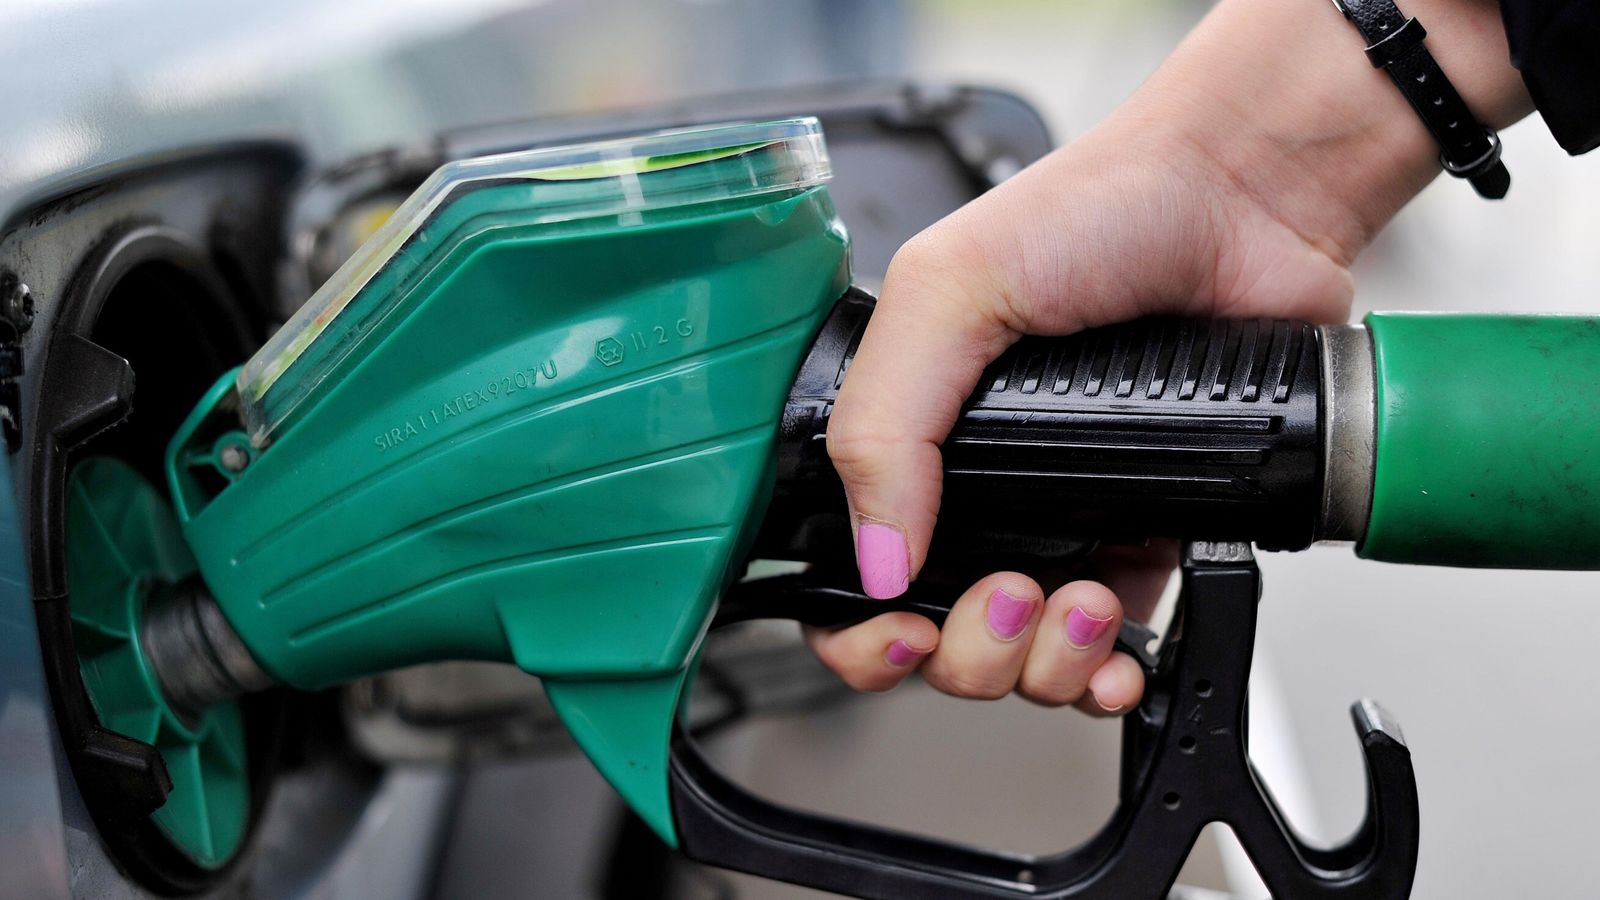 Drivers missing out on 10p cut in petrol prices, says RAC